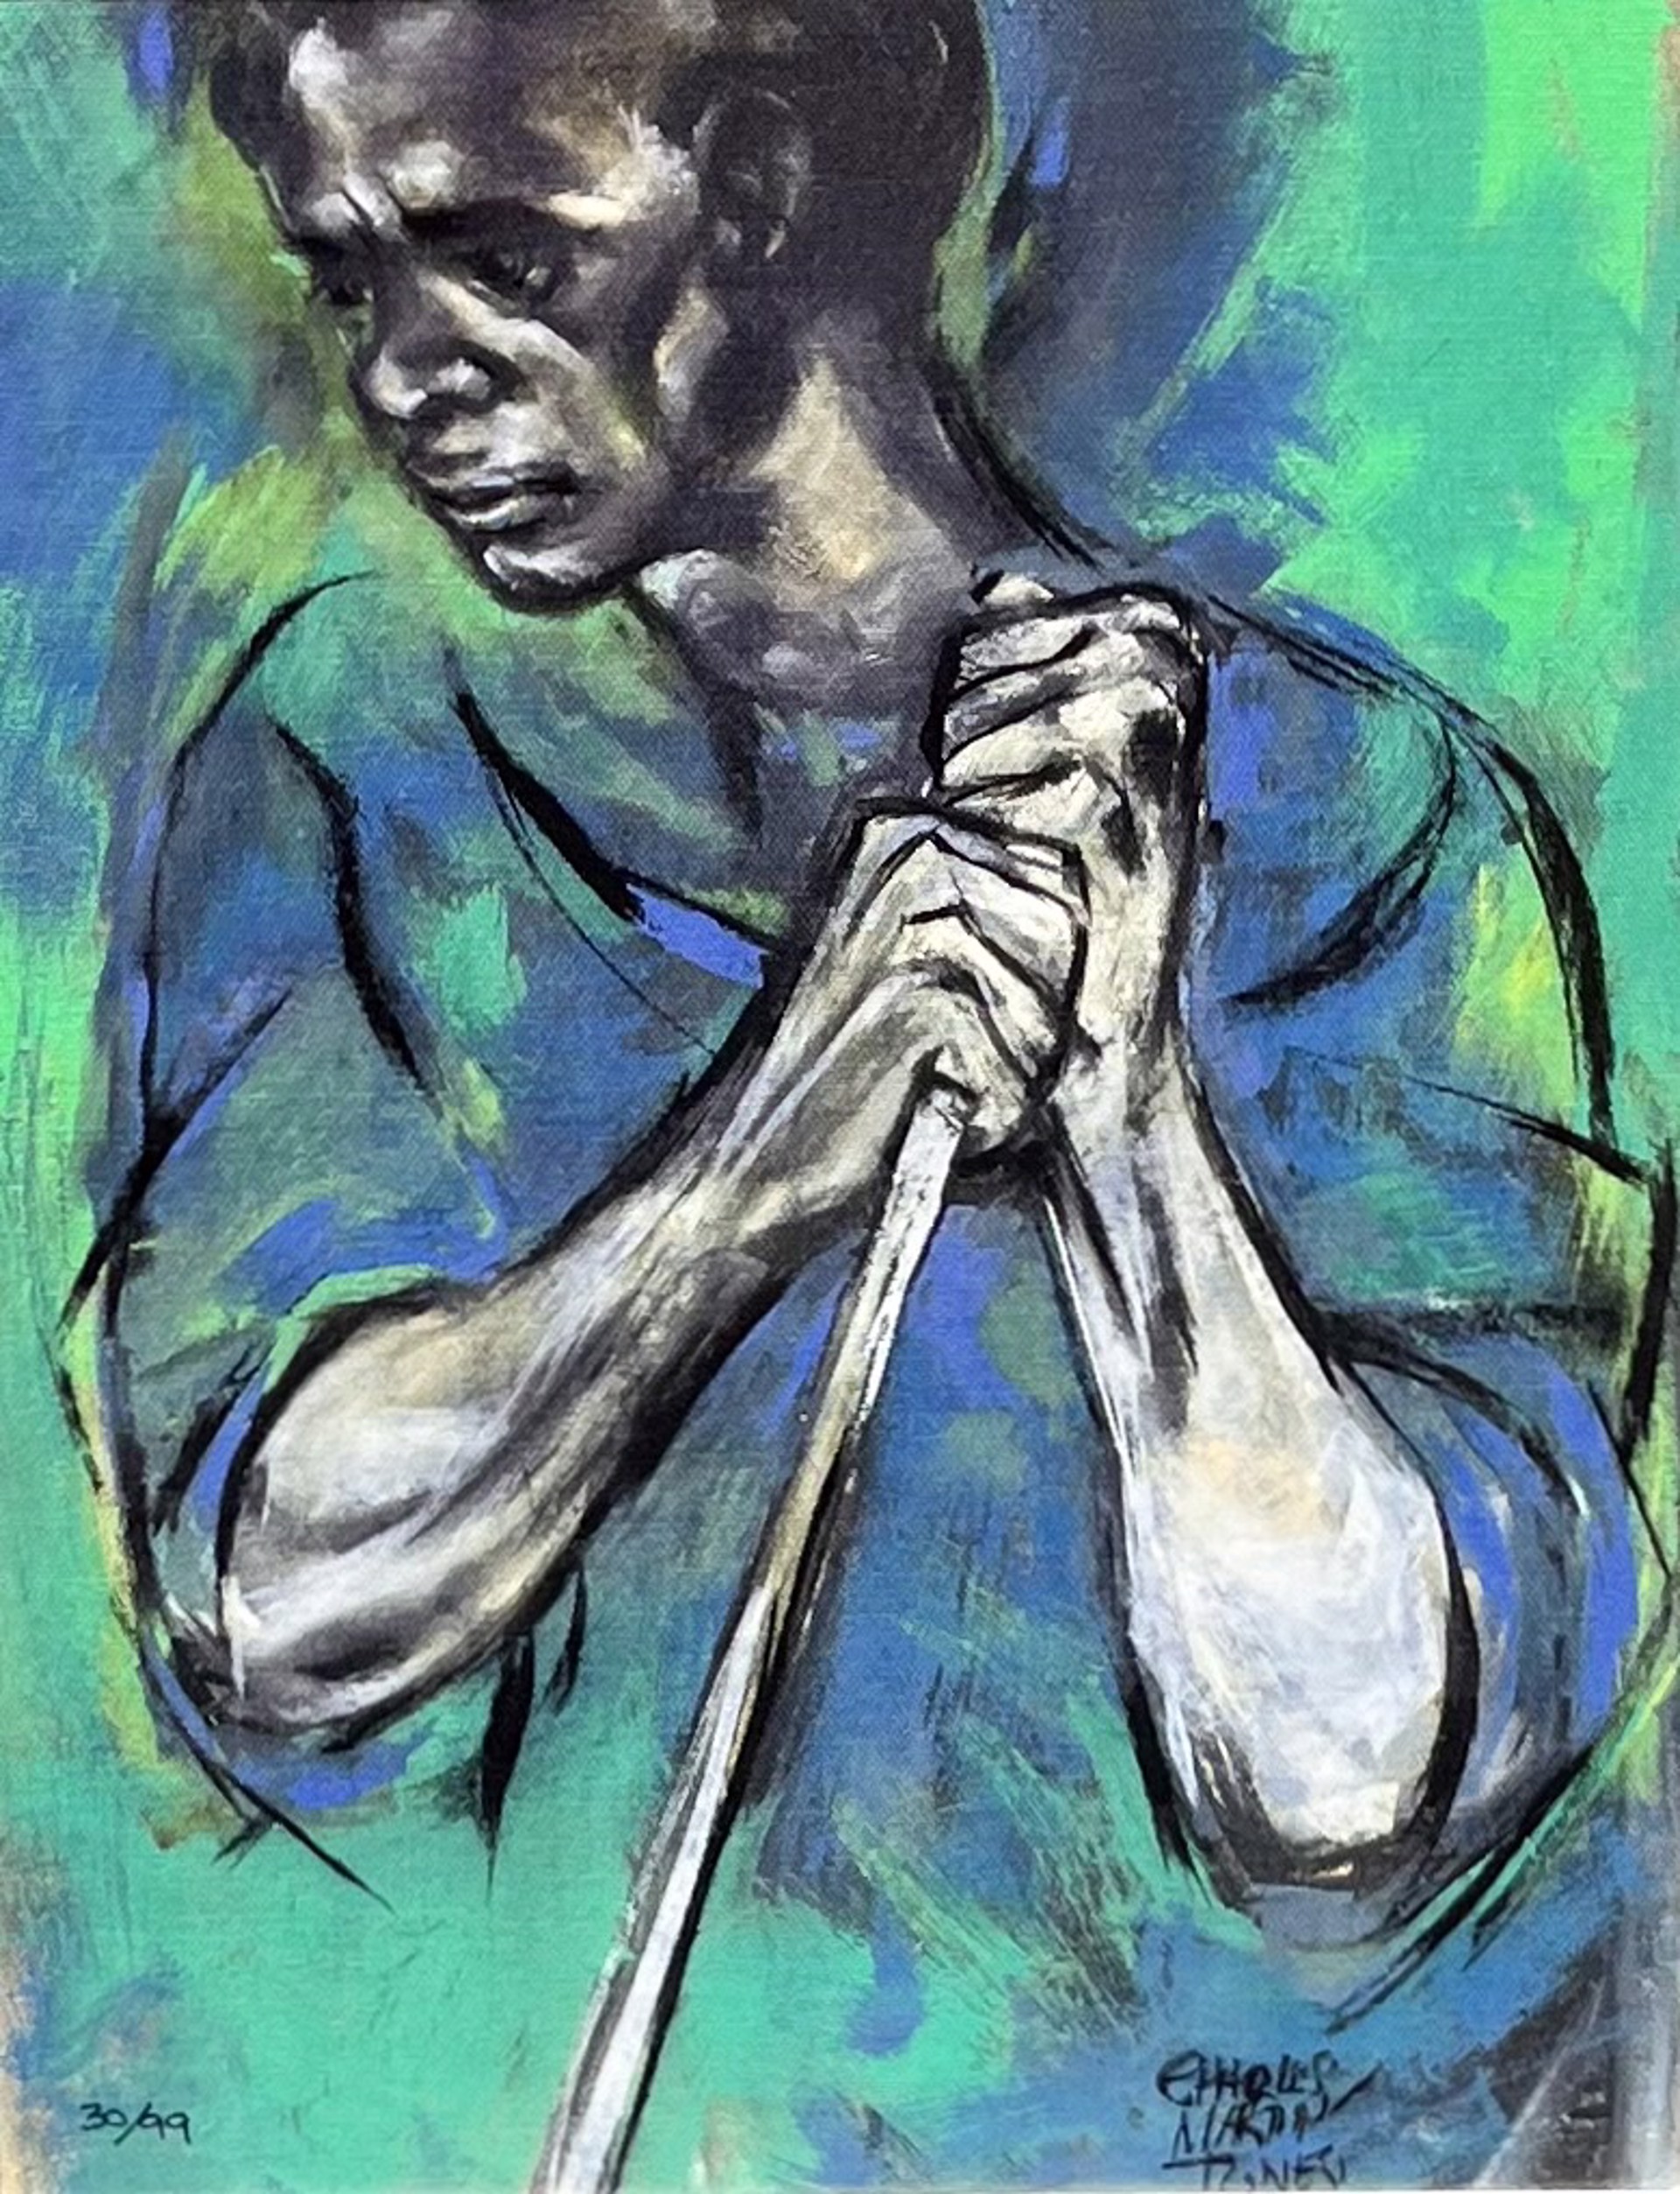 Man on Green and Blue by Chuck Jones